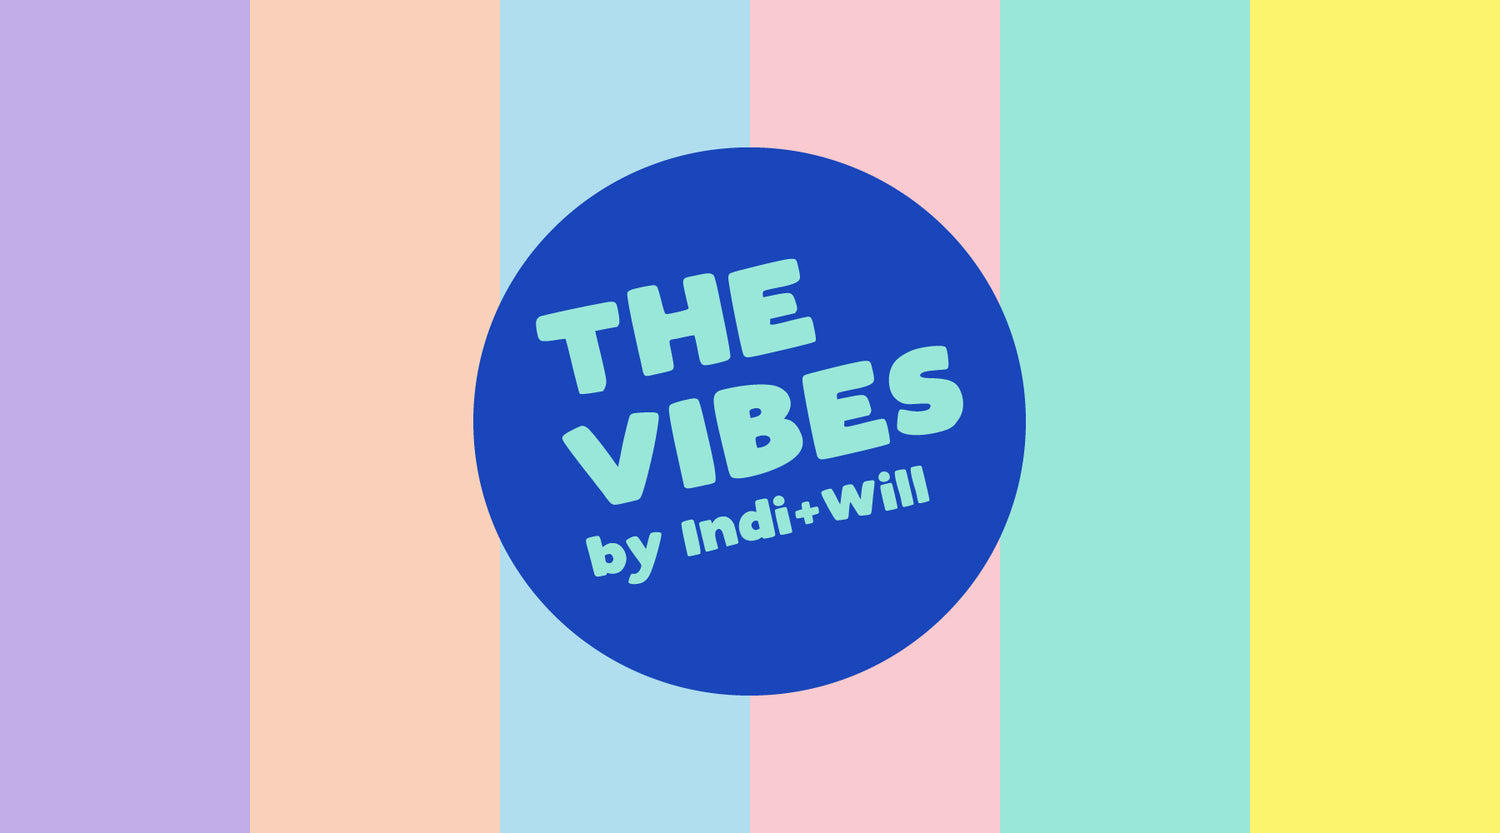 Meet the vibes!